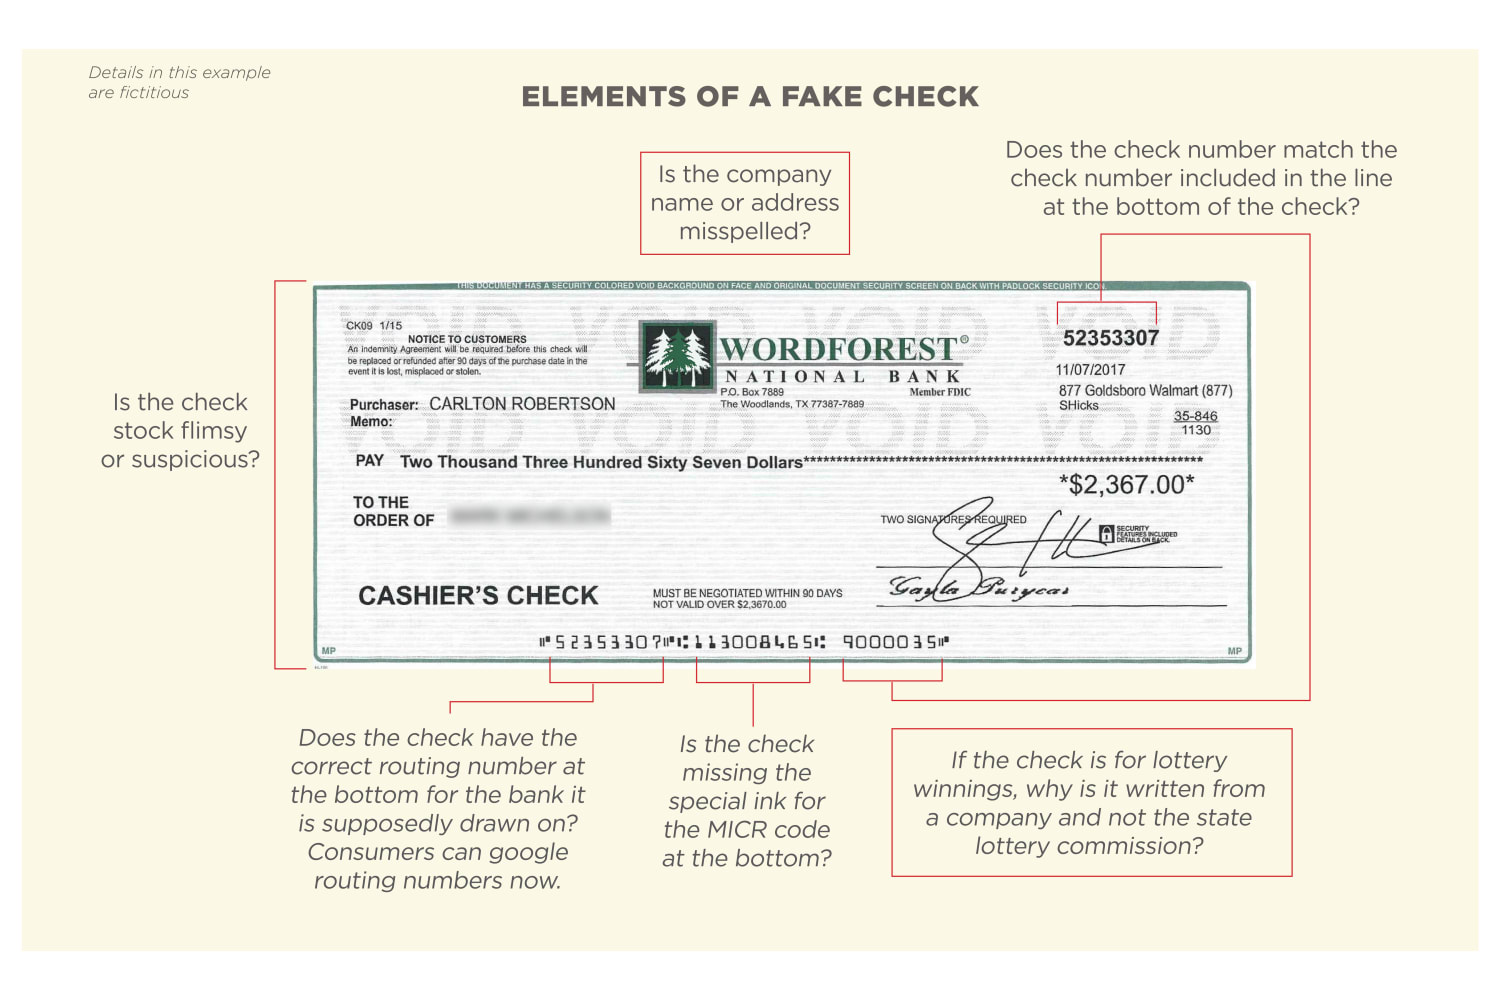 Scammers use fake checks to steal tens of millions of dollars each